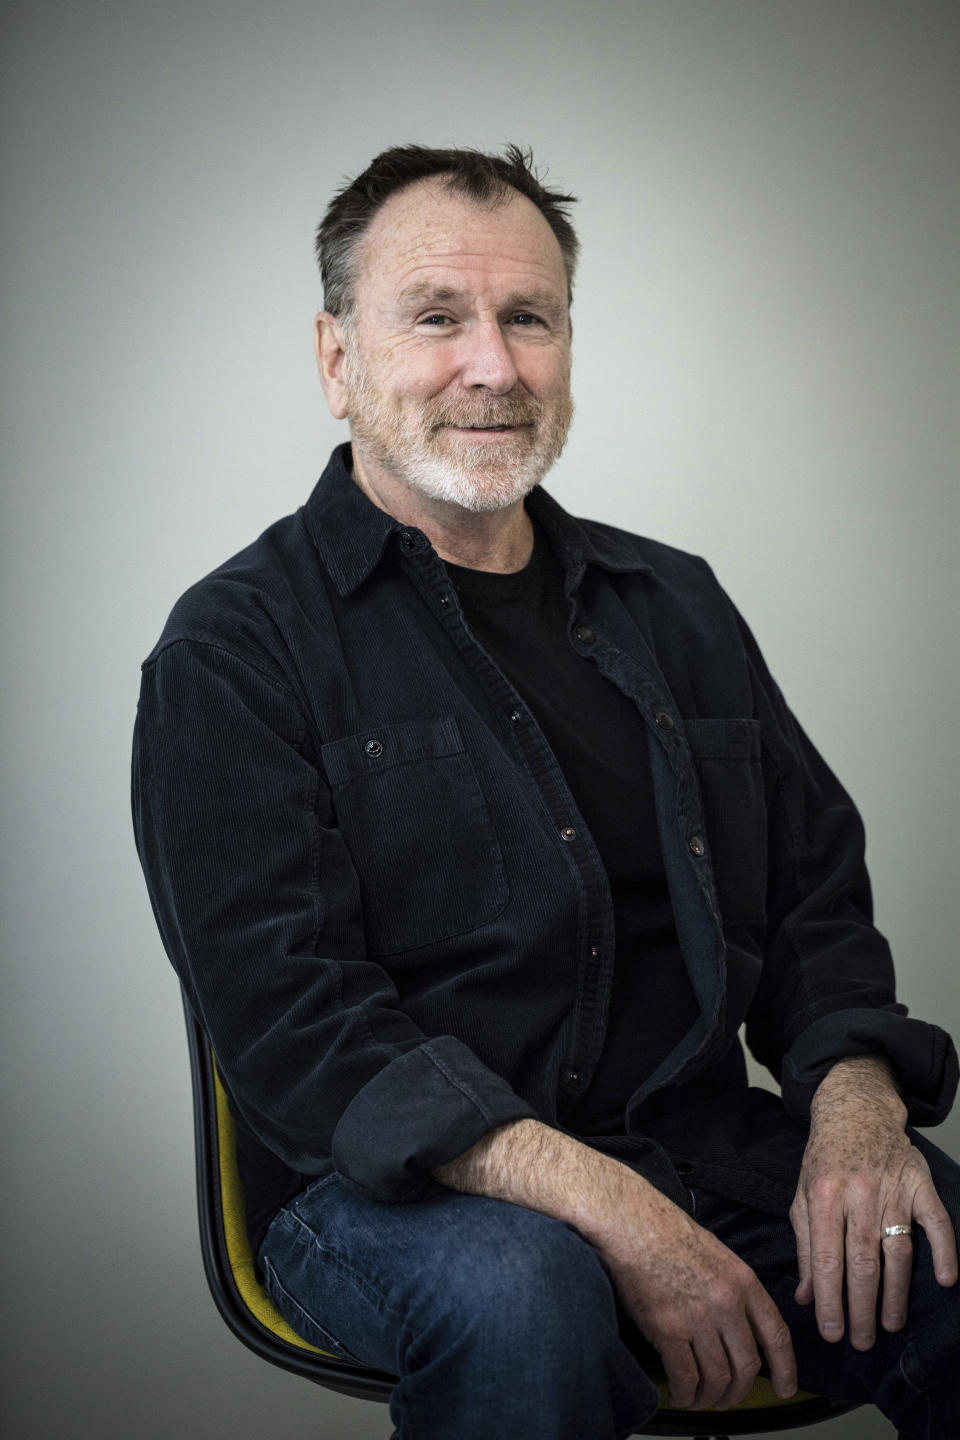 Colin Quinn poses for a portrait to promote his eighth one-man show, “Colin Quinn: Small Talk,” on Tuesday, Jan. 24, 2023, in New York. (Photo by Matt Licari/Invision/AP)